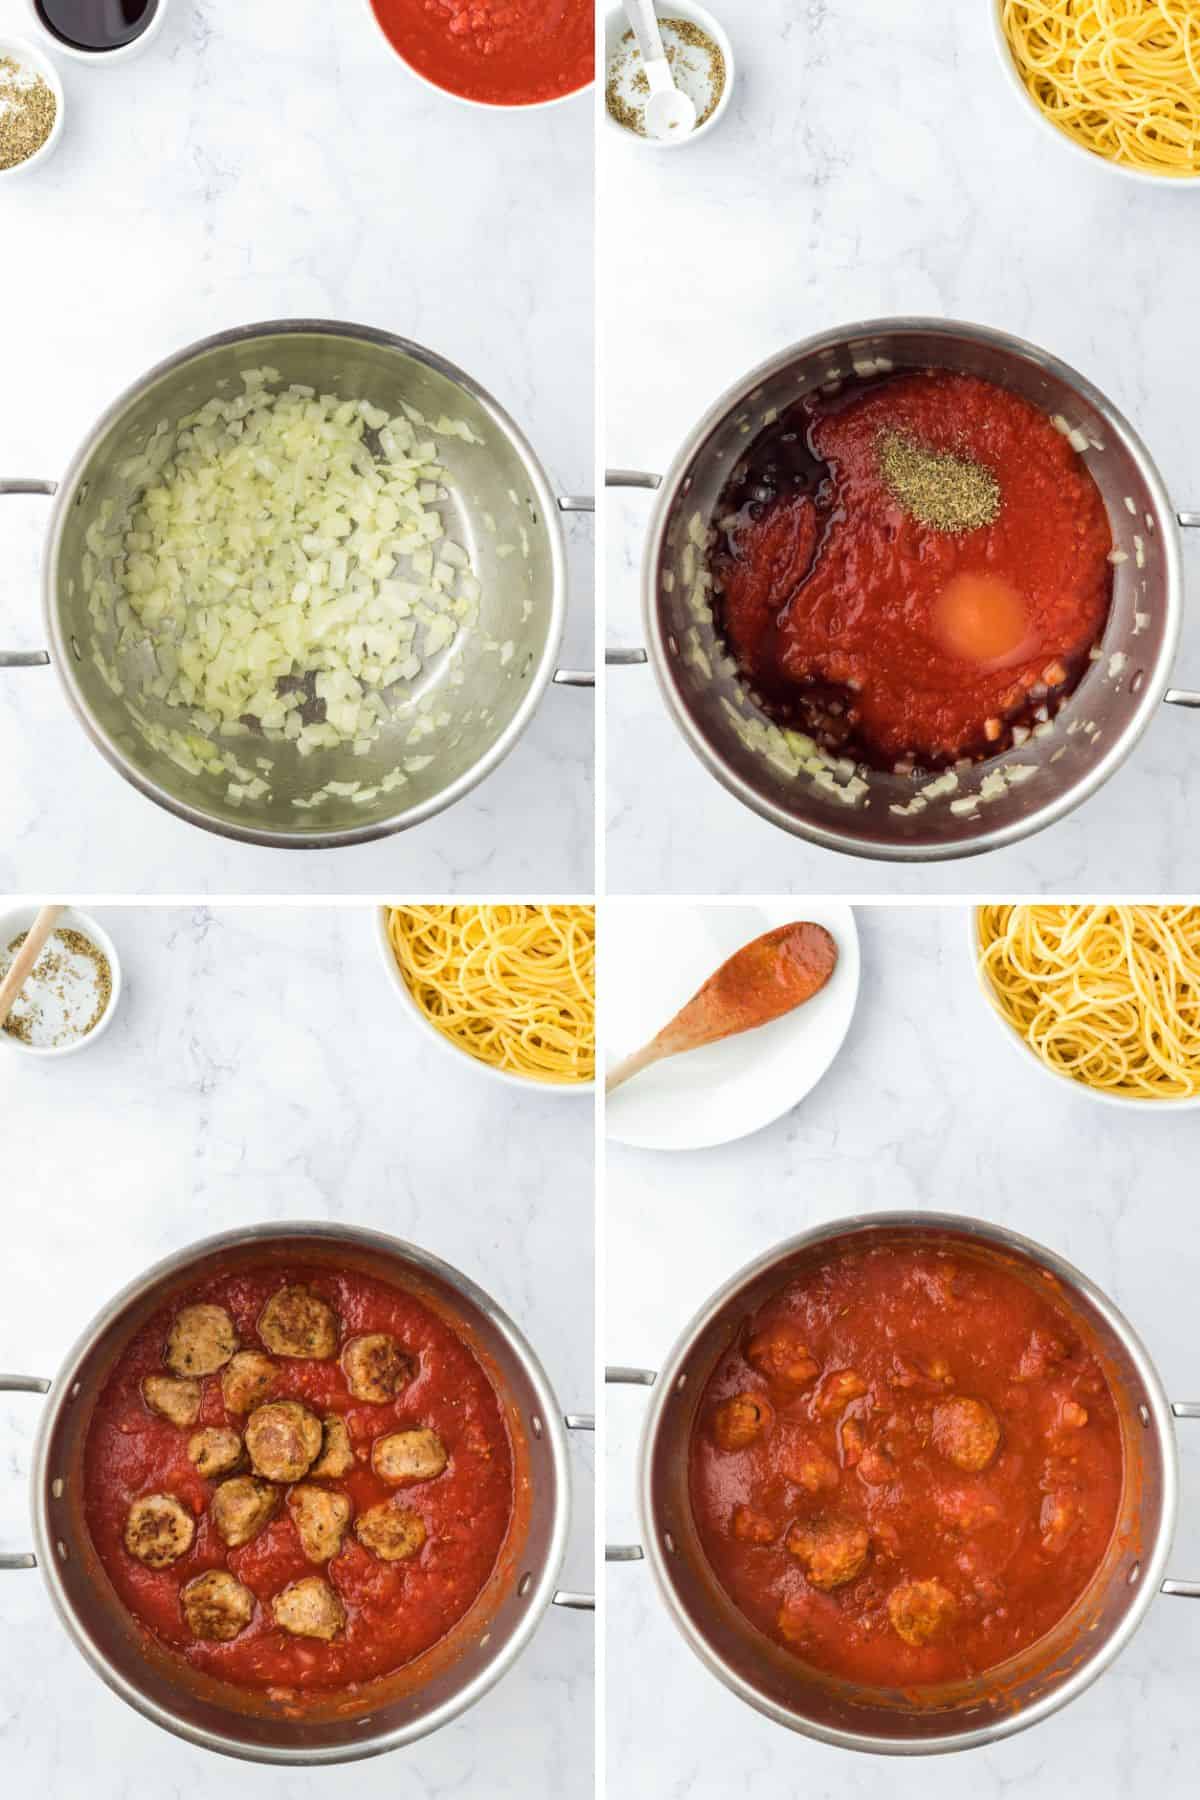 A collage of images showing the steps for making the spaghetti sauce for meatballs.